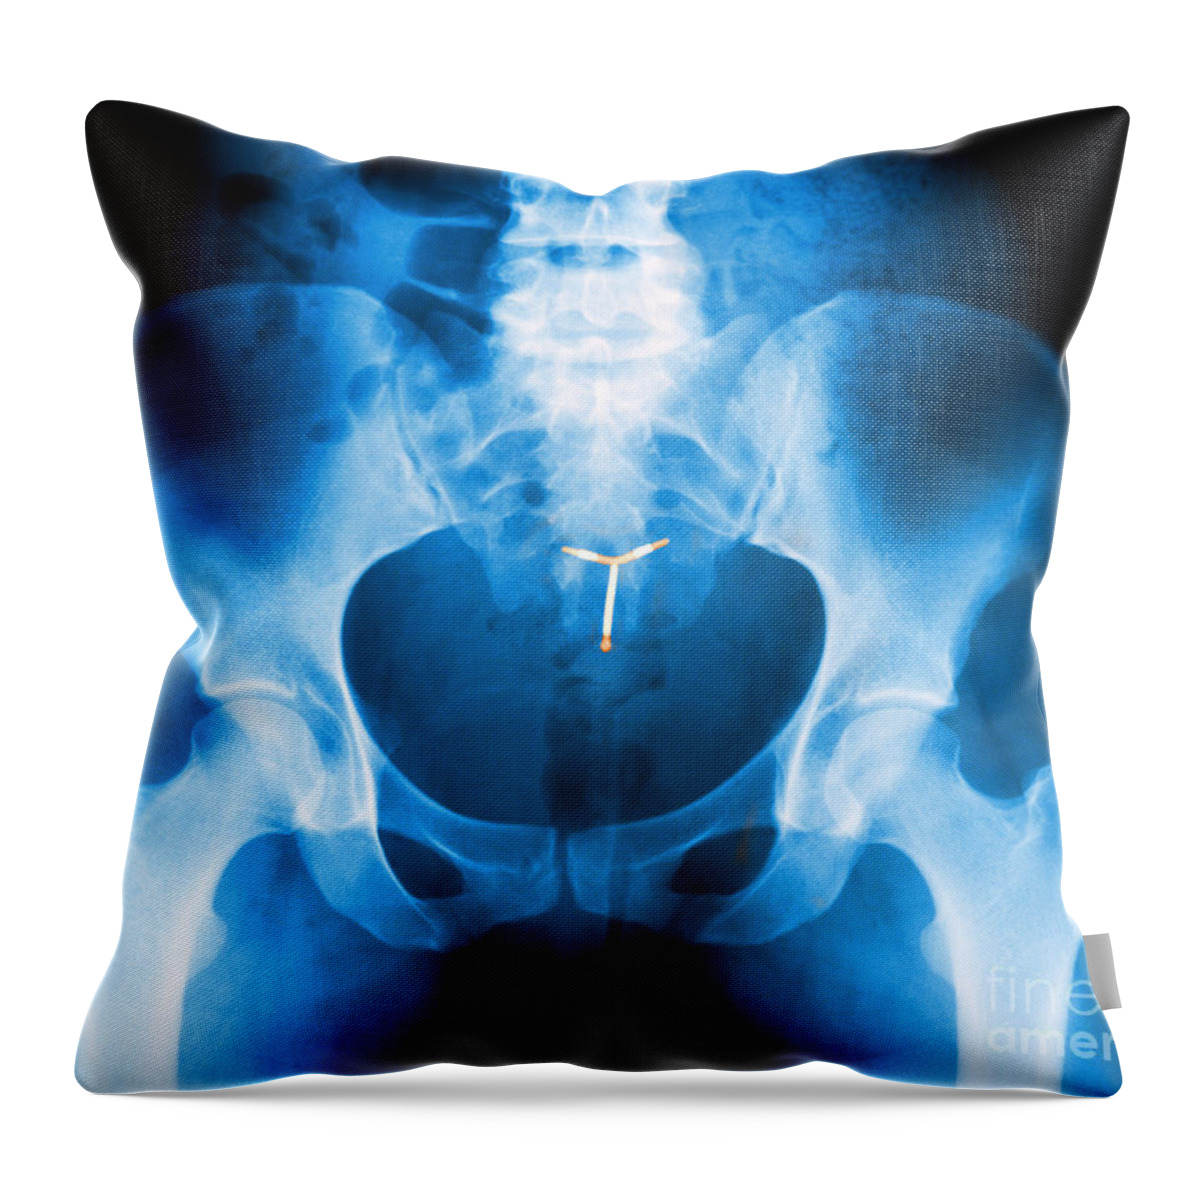 Birth Control Throw Pillow featuring the photograph Iud Contraceptive, X-ray by George Mattei